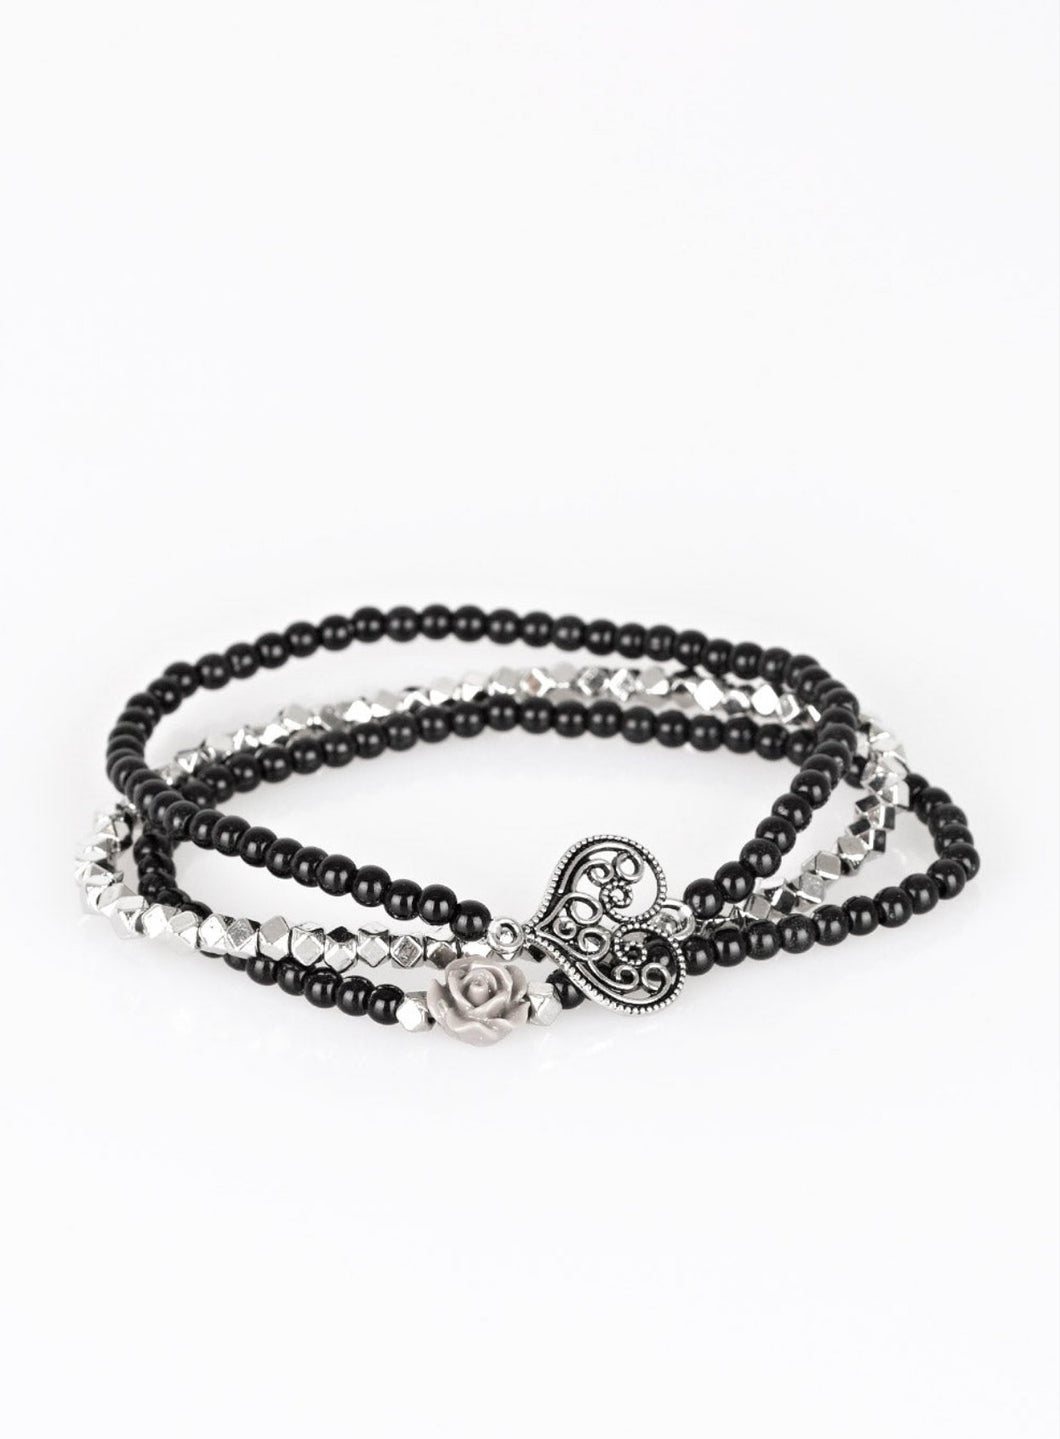 Lover's Loot Black and Silver Bracelet